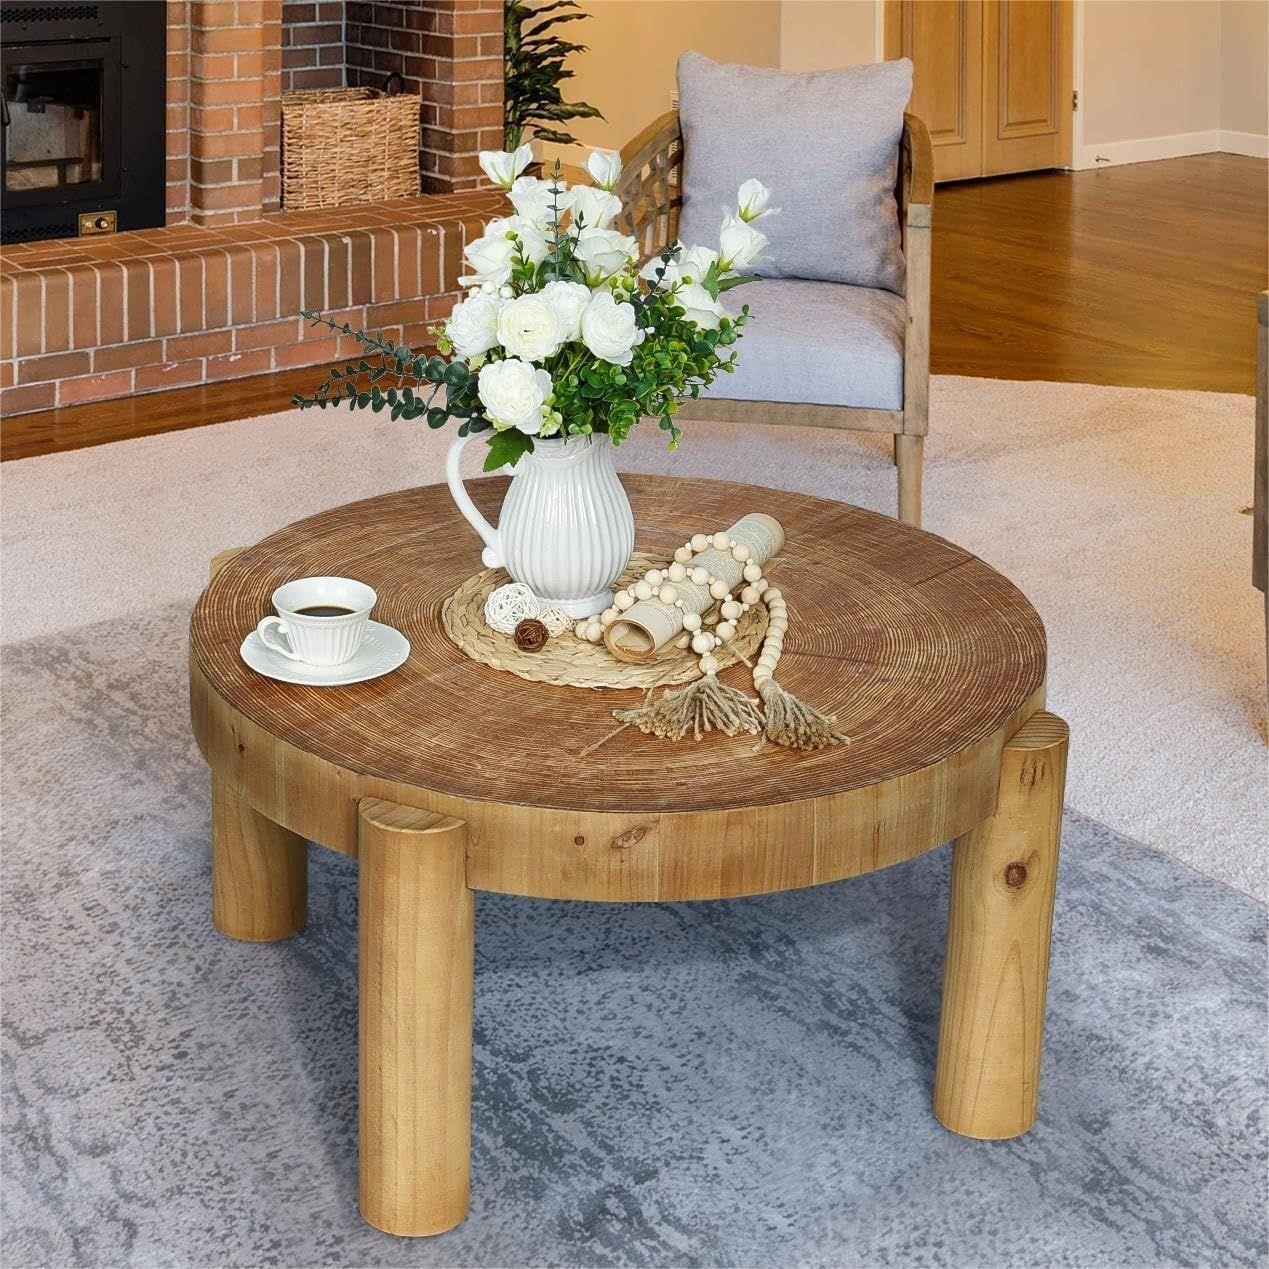 Round Wood Coffee Table - 31.3"